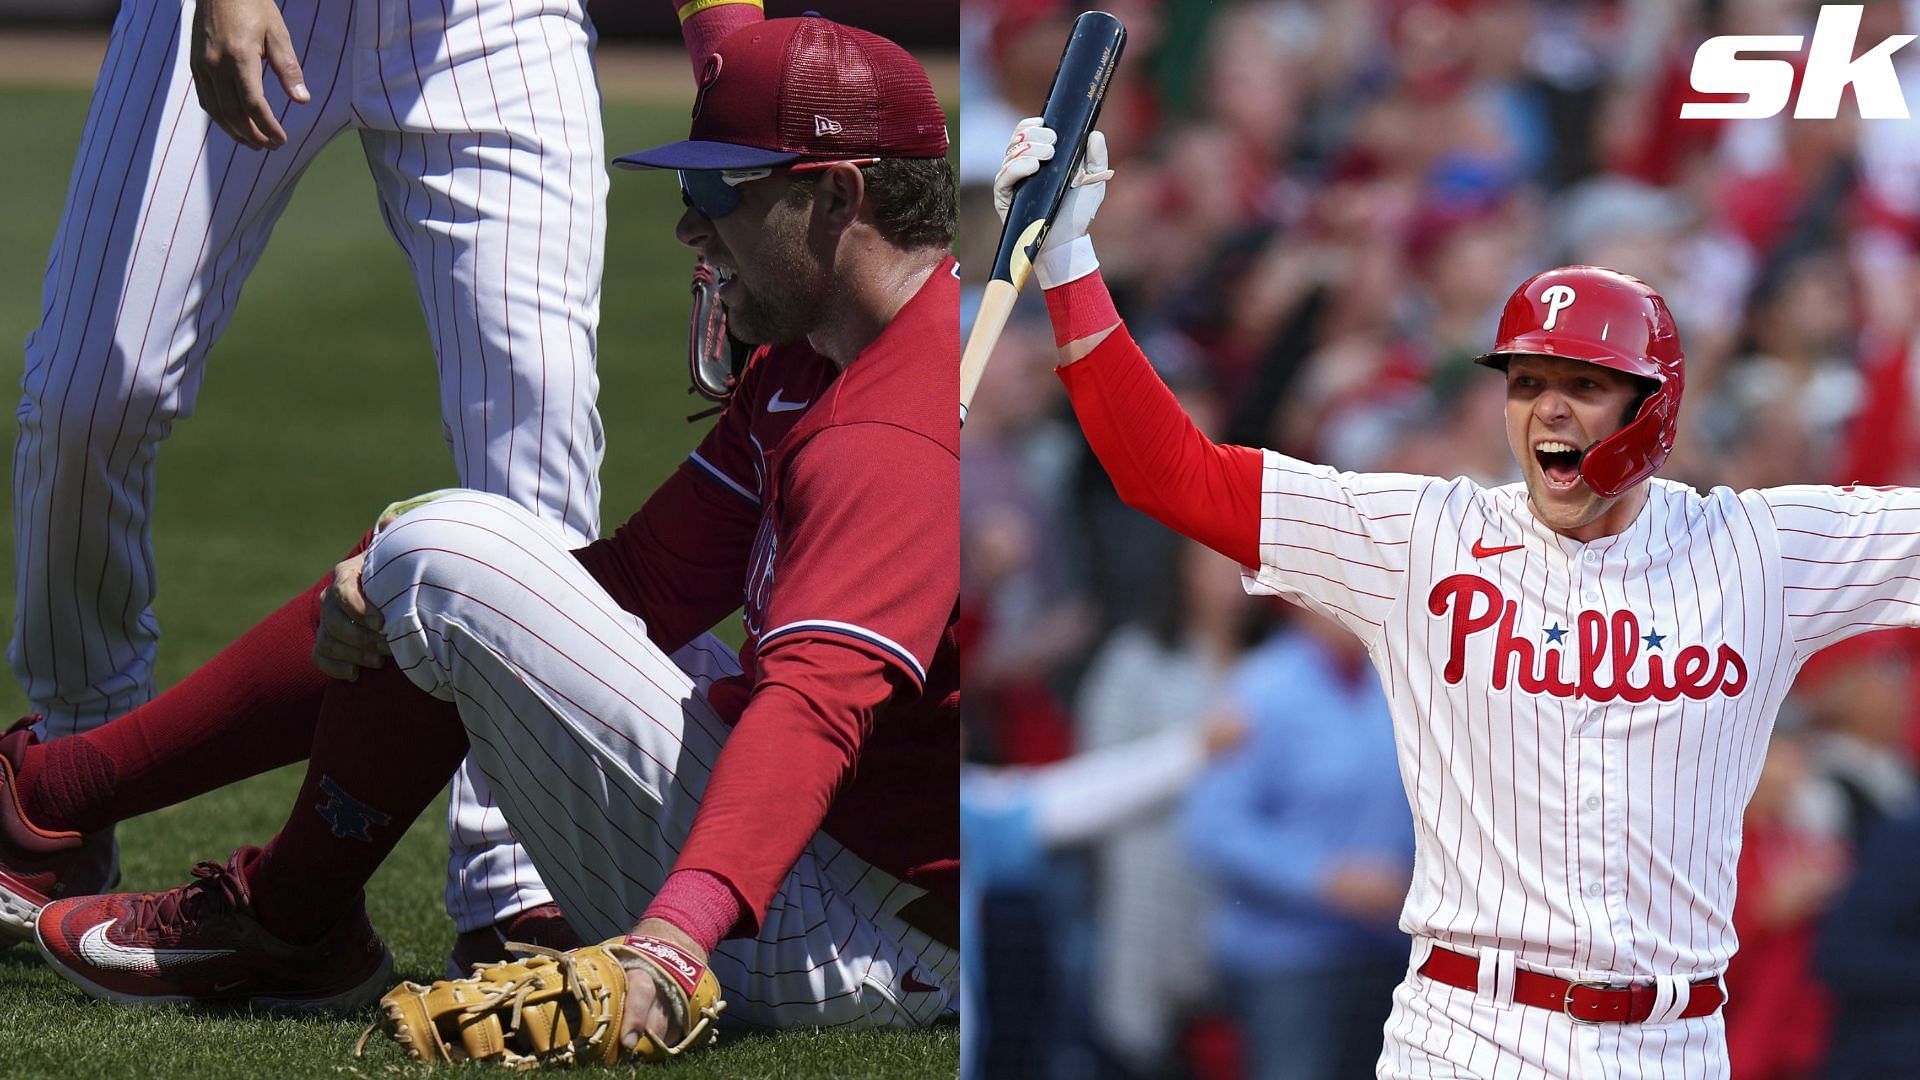 Fans hope for an October return from Phillies